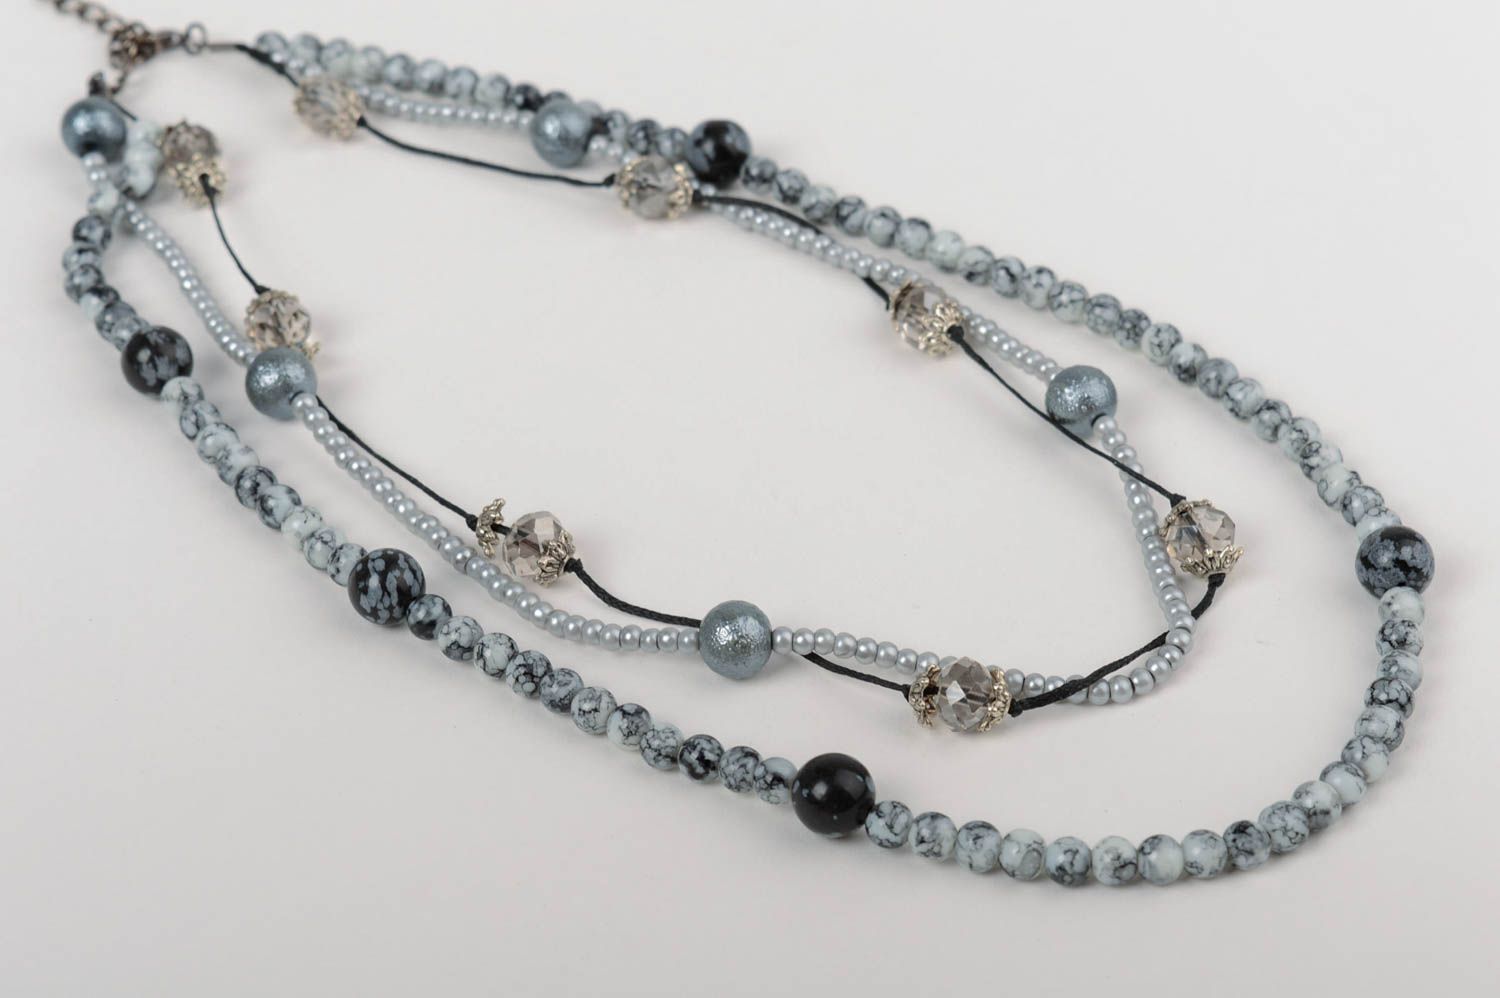 Czech crystal necklace with ceramic pearls on long cord handmade accessory photo 2